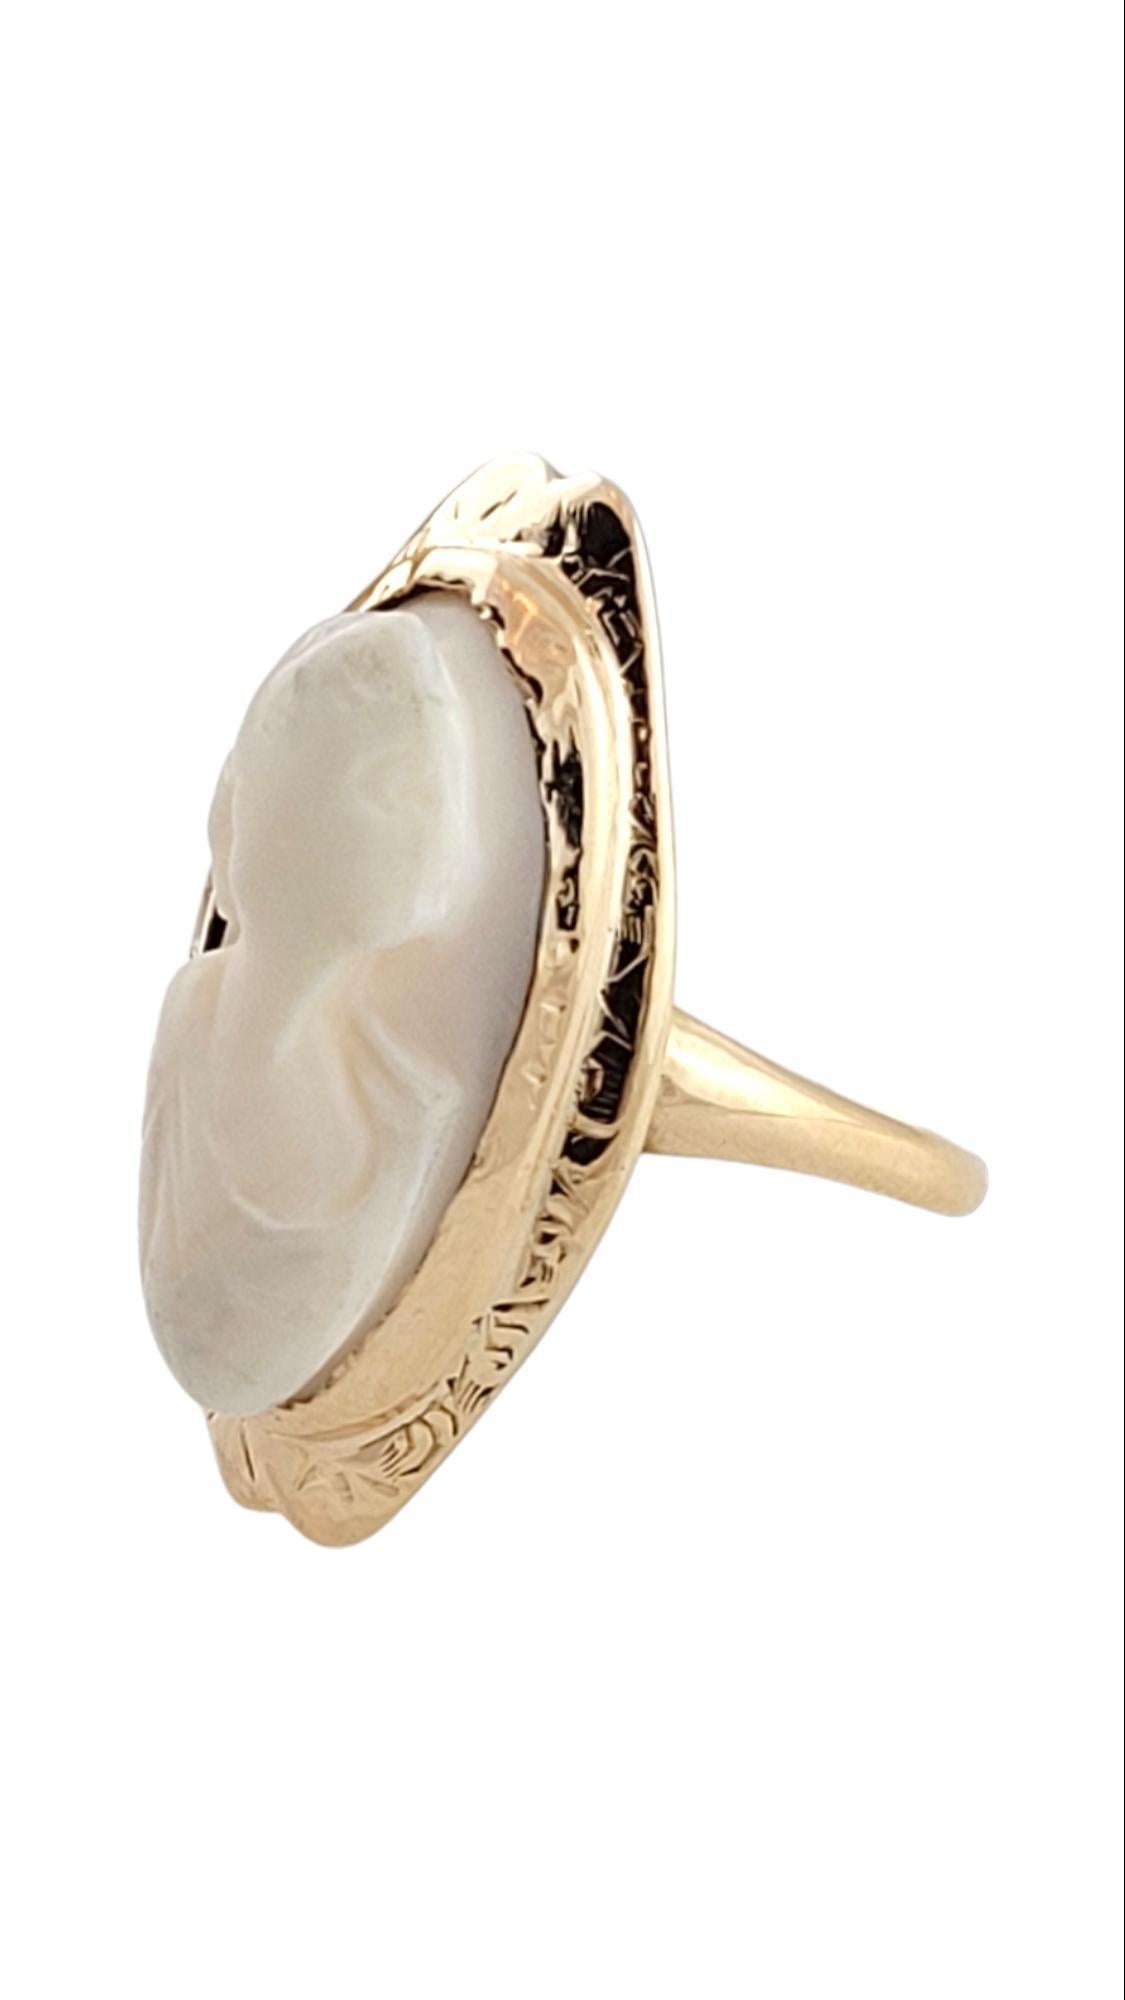 14K Yellow Gold Cameo Ring Size 3.75 #15874 In Good Condition For Sale In Washington Depot, CT